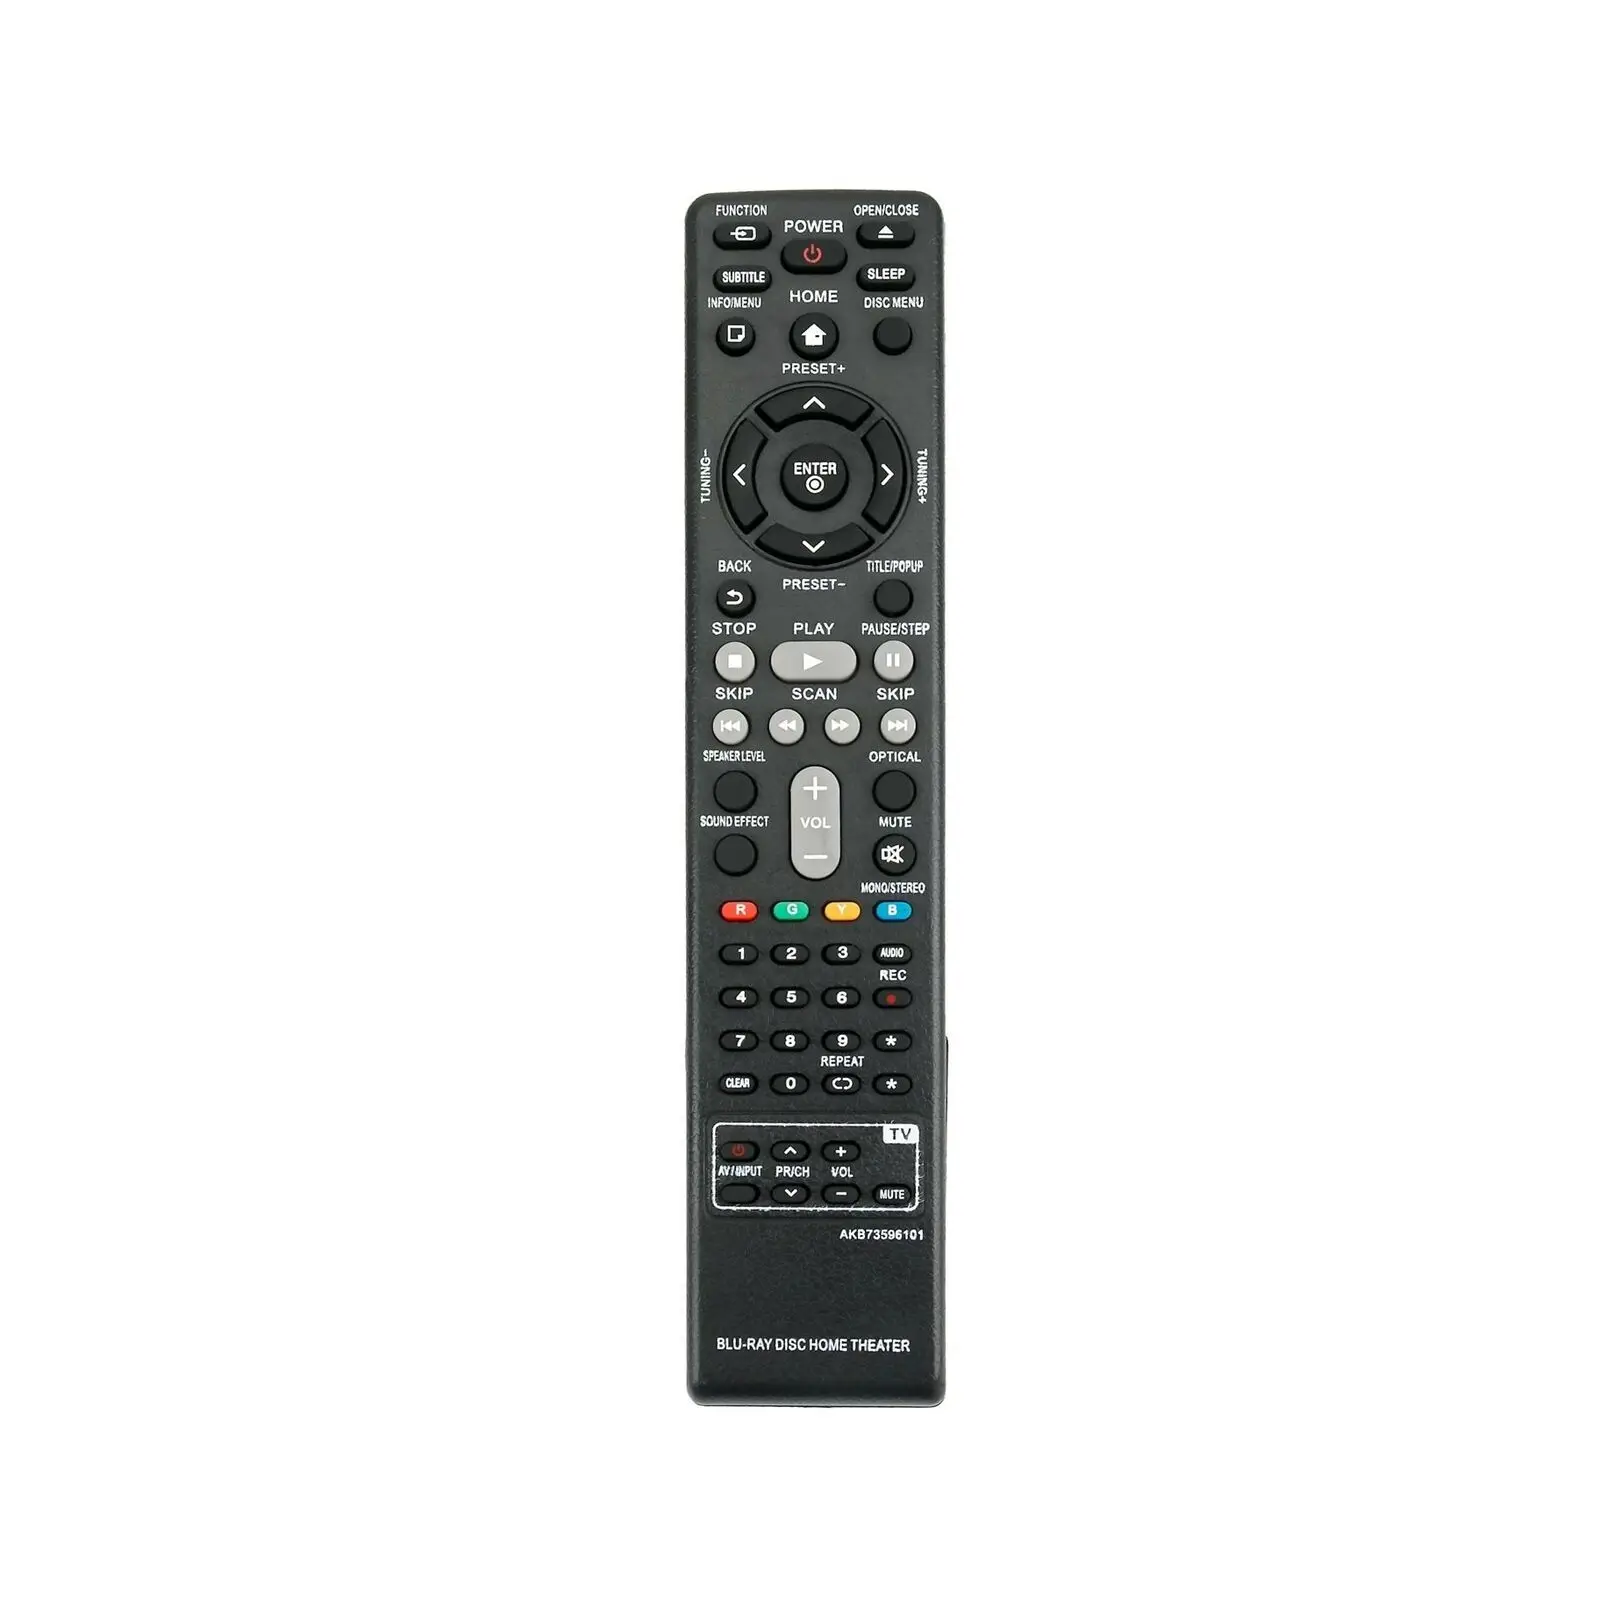 Treinstation onderwerp Maria New Akb73596101 Remote Control For Lg Smart 3d Blu-ray Dvd Home Theater  System - Buy Akb73596101 Remote Control,Use For Lg Dvd/bd/home Theater  Product on Alibaba.com